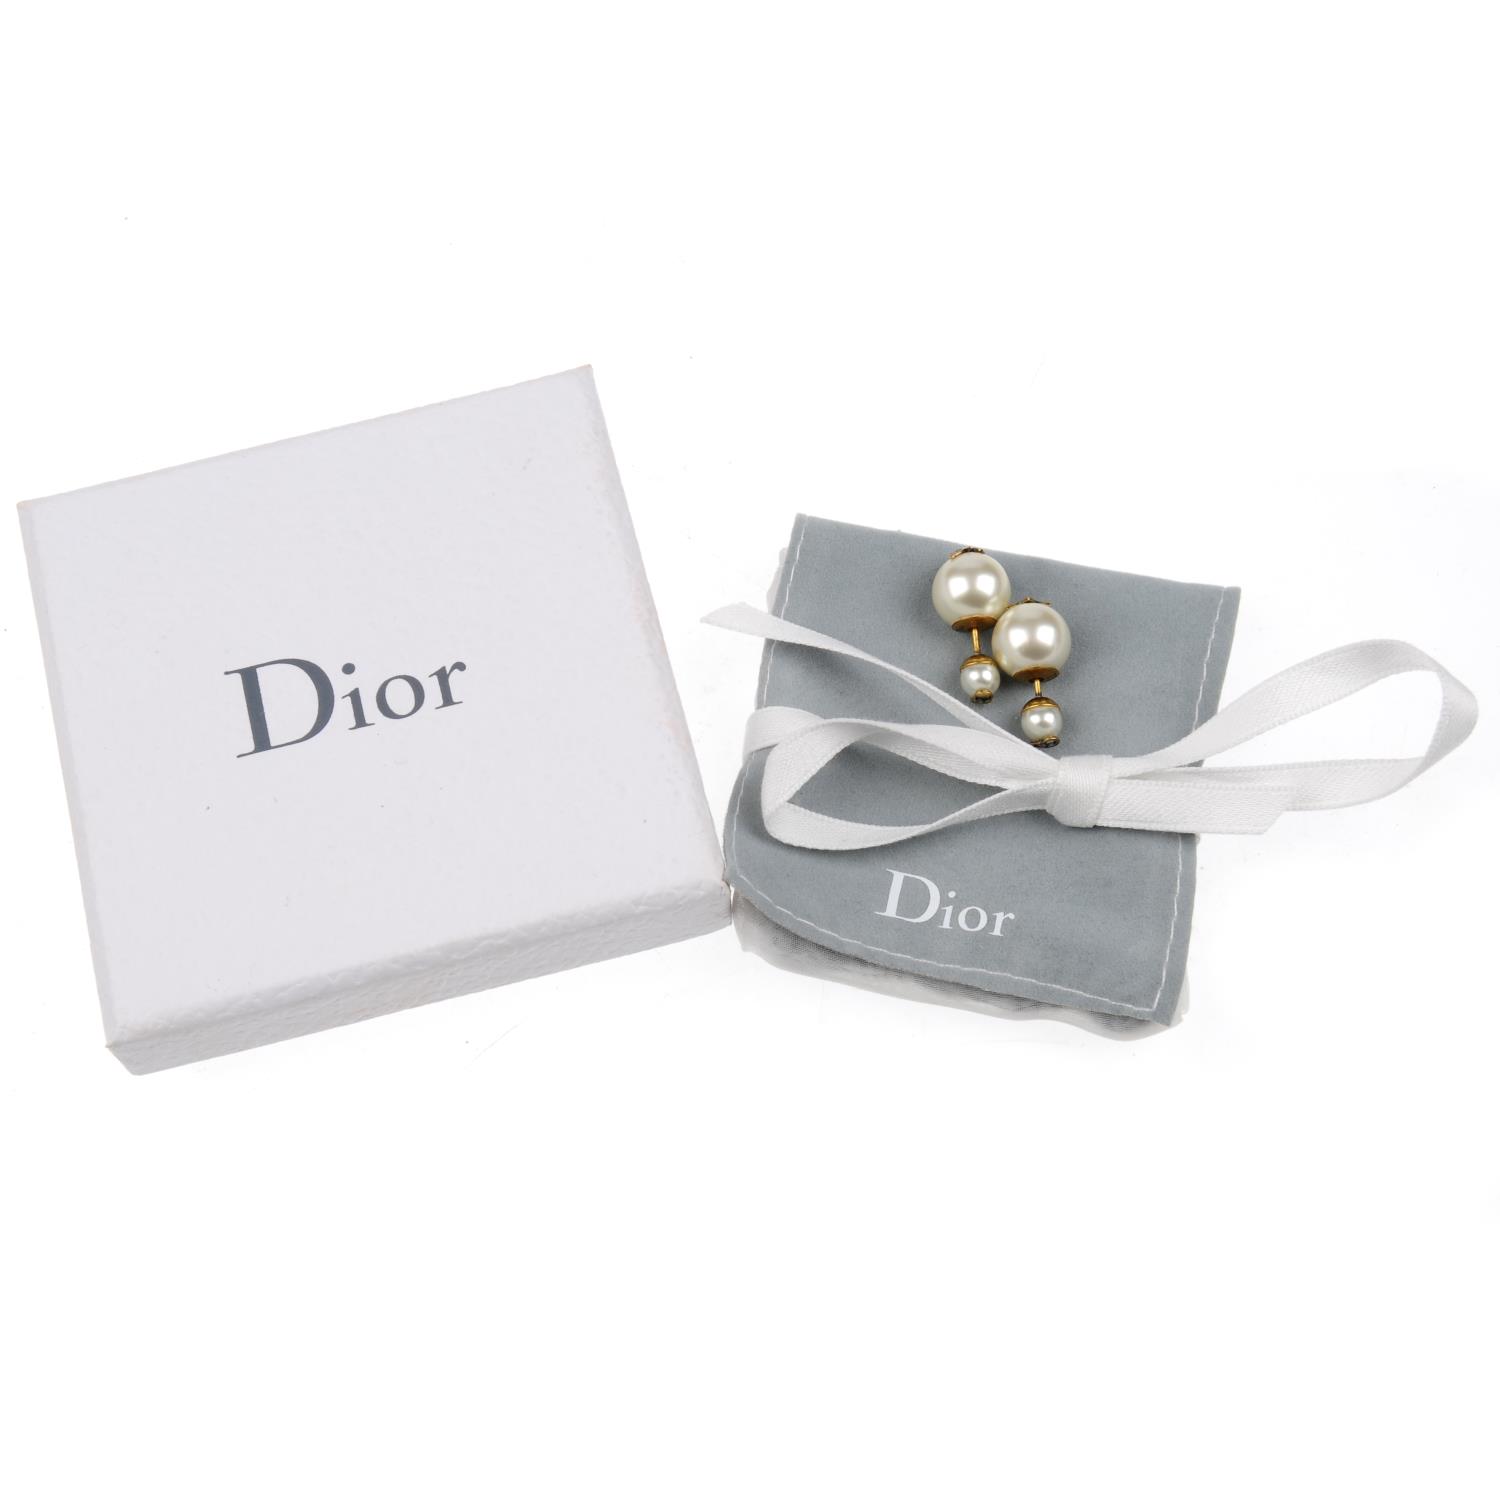 CHRISTIAN DIOR - a pair of stud earrings. - Image 5 of 5